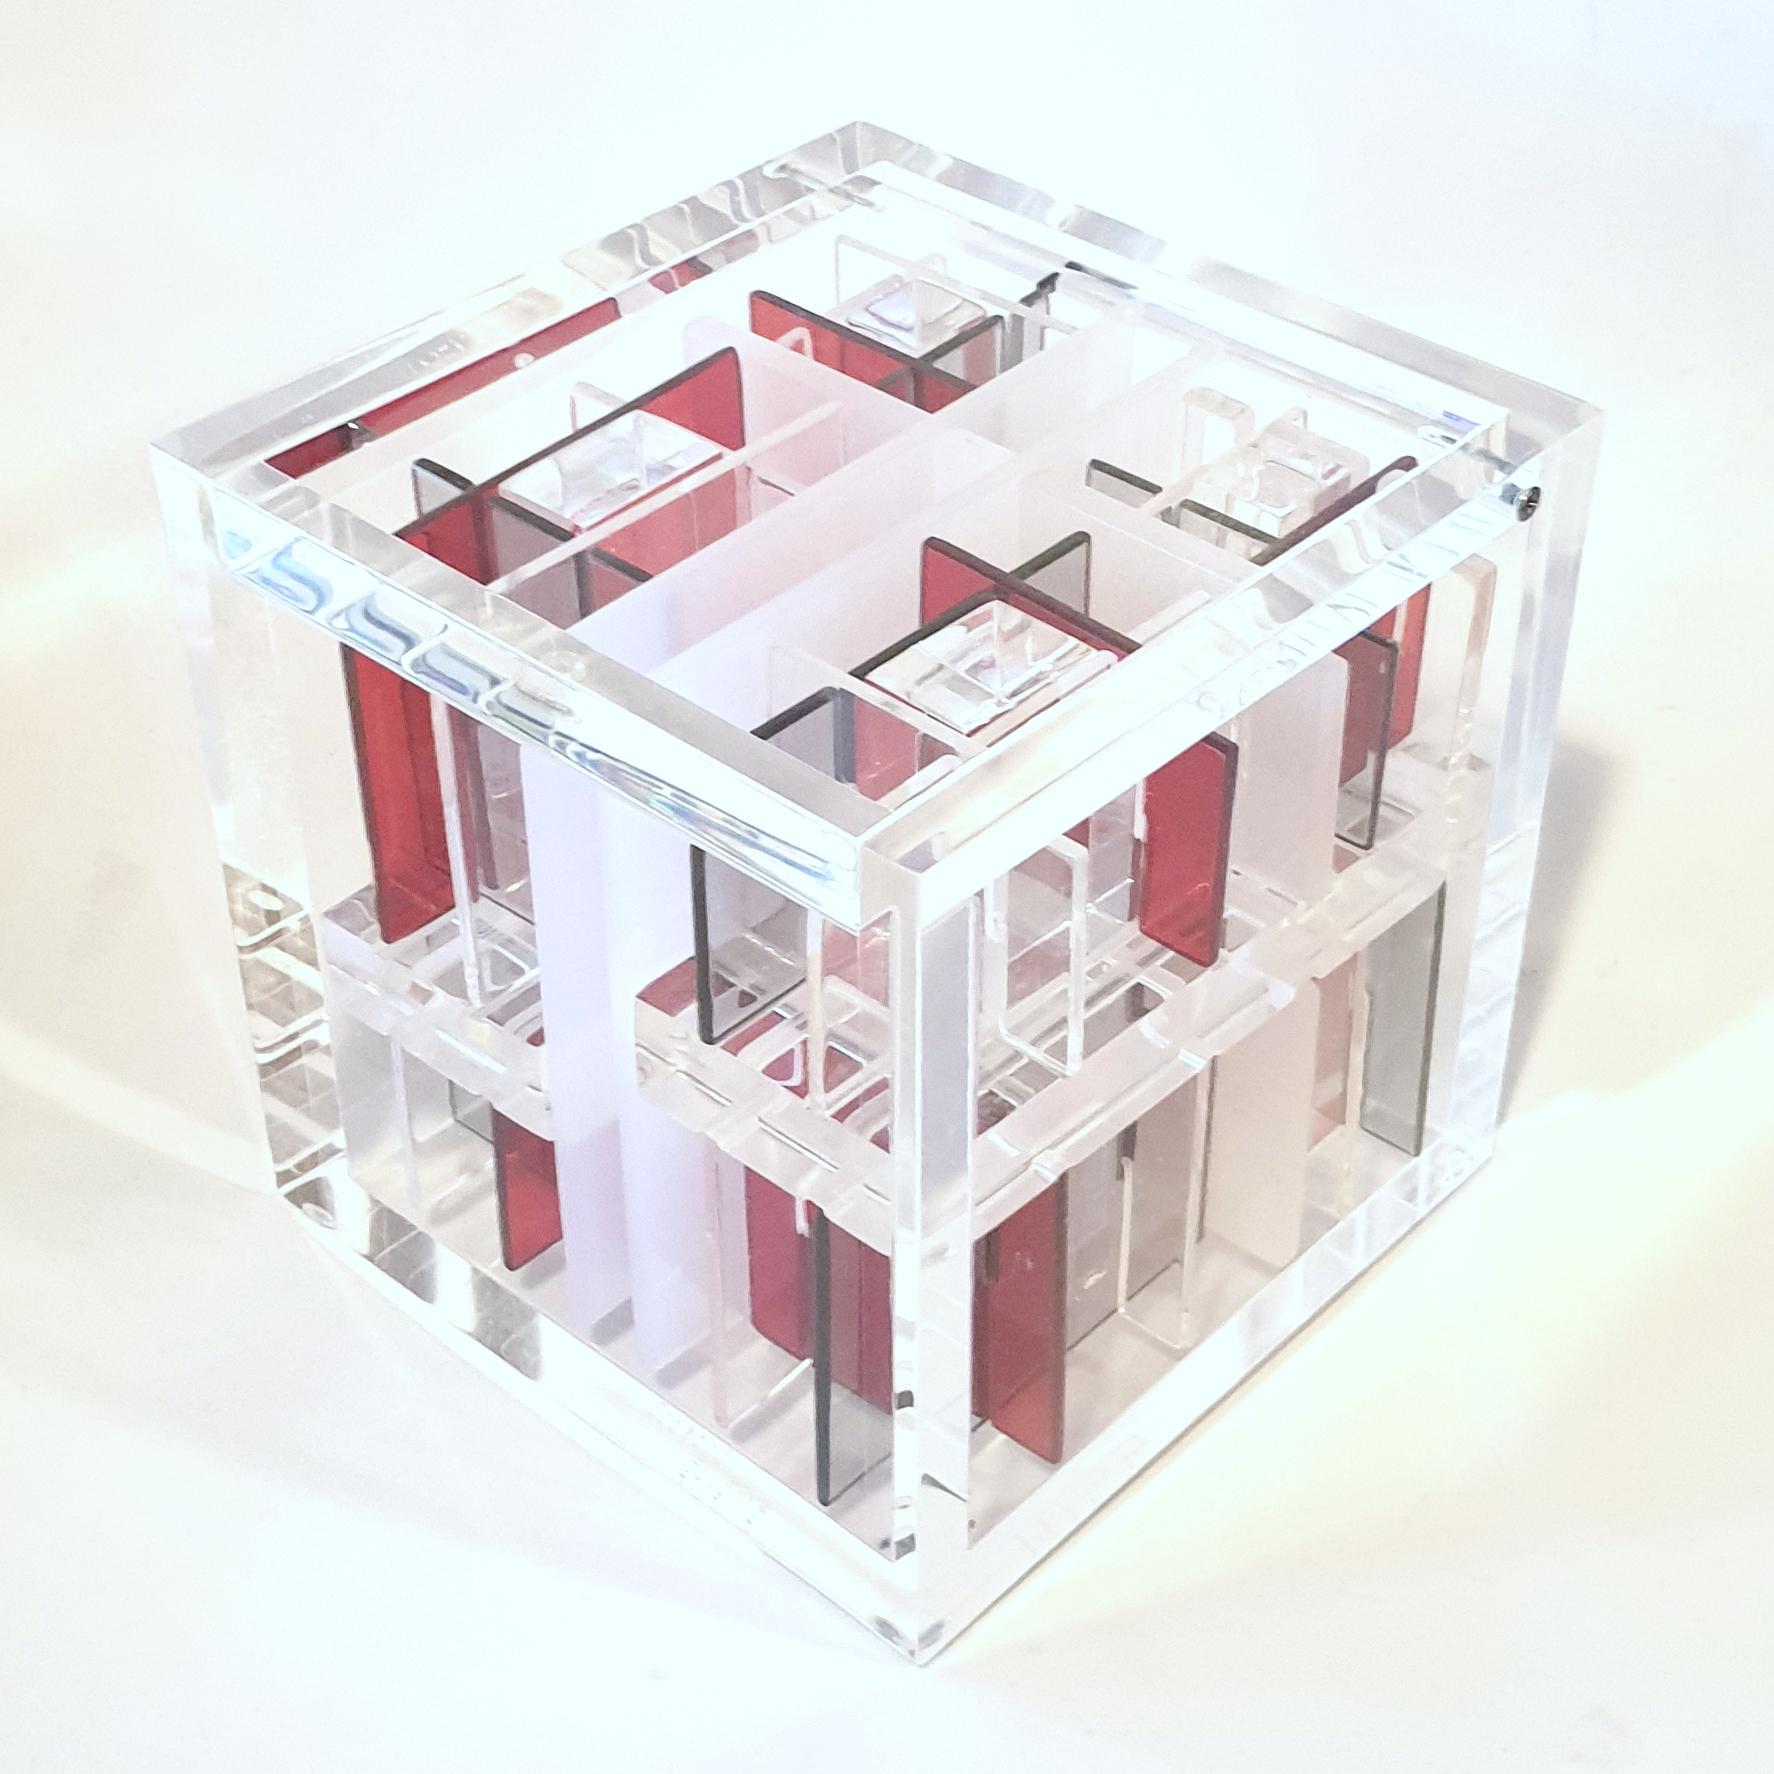 System Red-Grey is a unique small size contemporary modern cube sculpture by the famous Dutch artist couple Nel Haringa and Fred Olijve in which they explore the effects of opposite compositions in red, grey and transparent. Signature